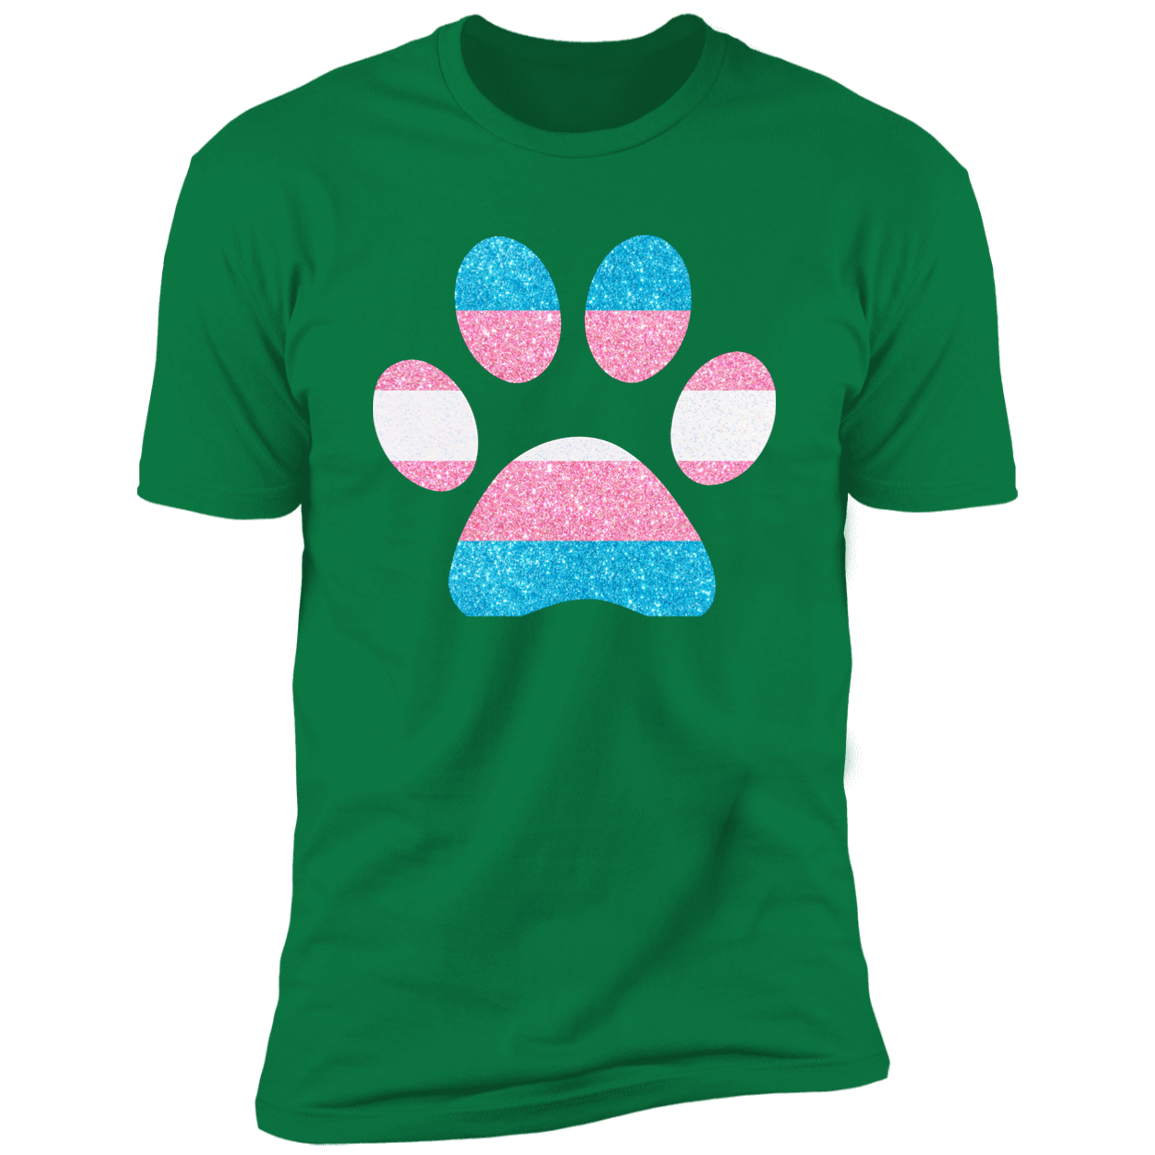 Dog Paw Trans Pride t-shirt, dog trans pride dog shirt for humans, in kelly green